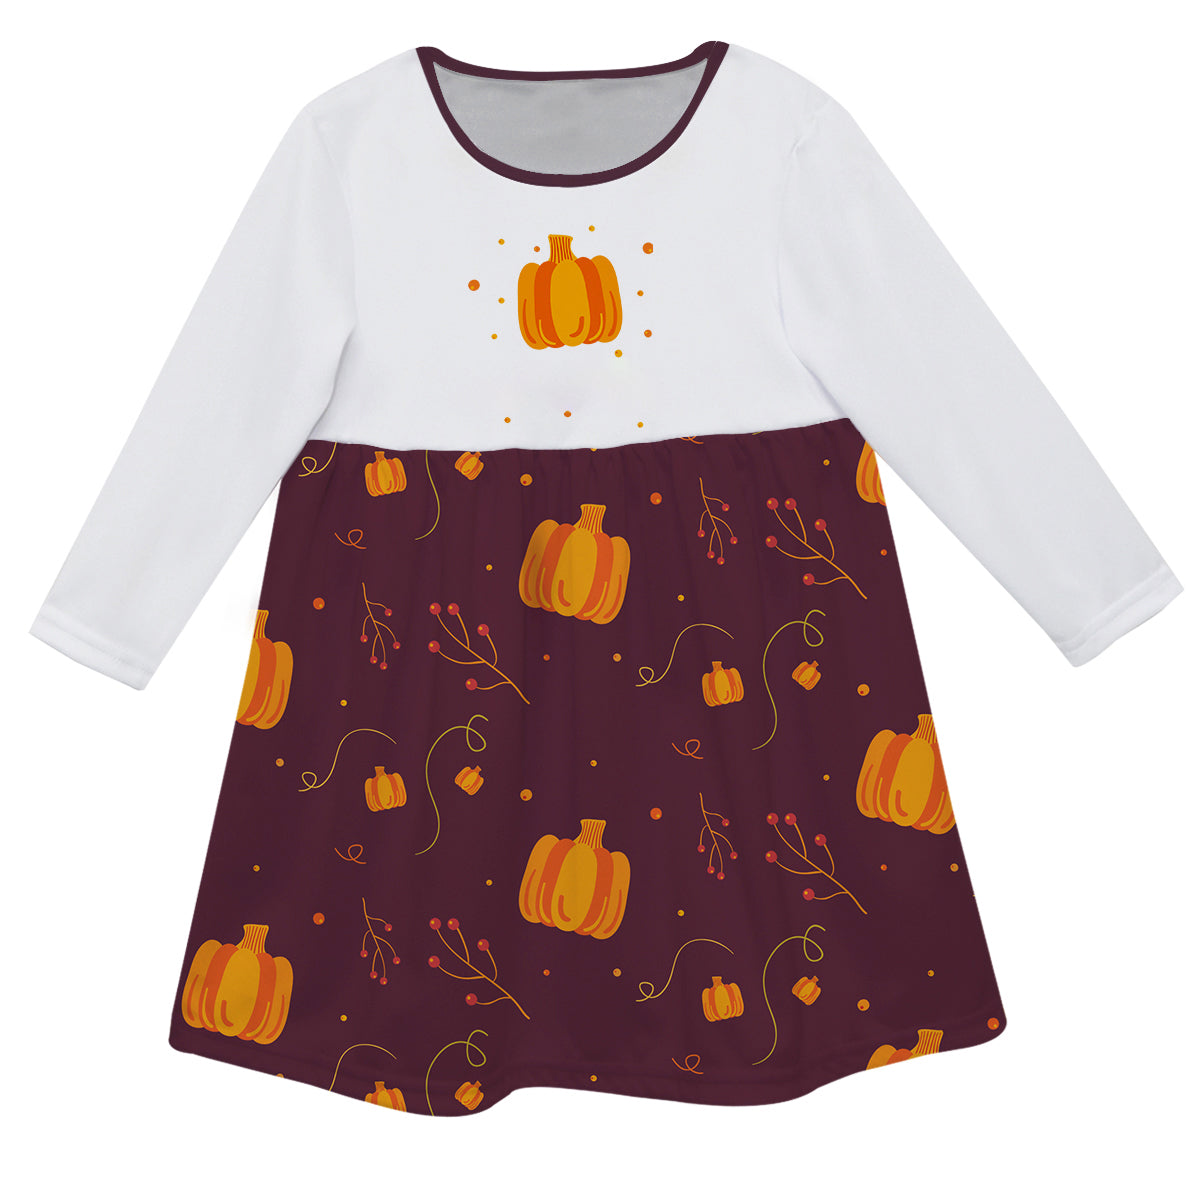 Girls white and brown pumpkin dress with name - Wimziy&Co.